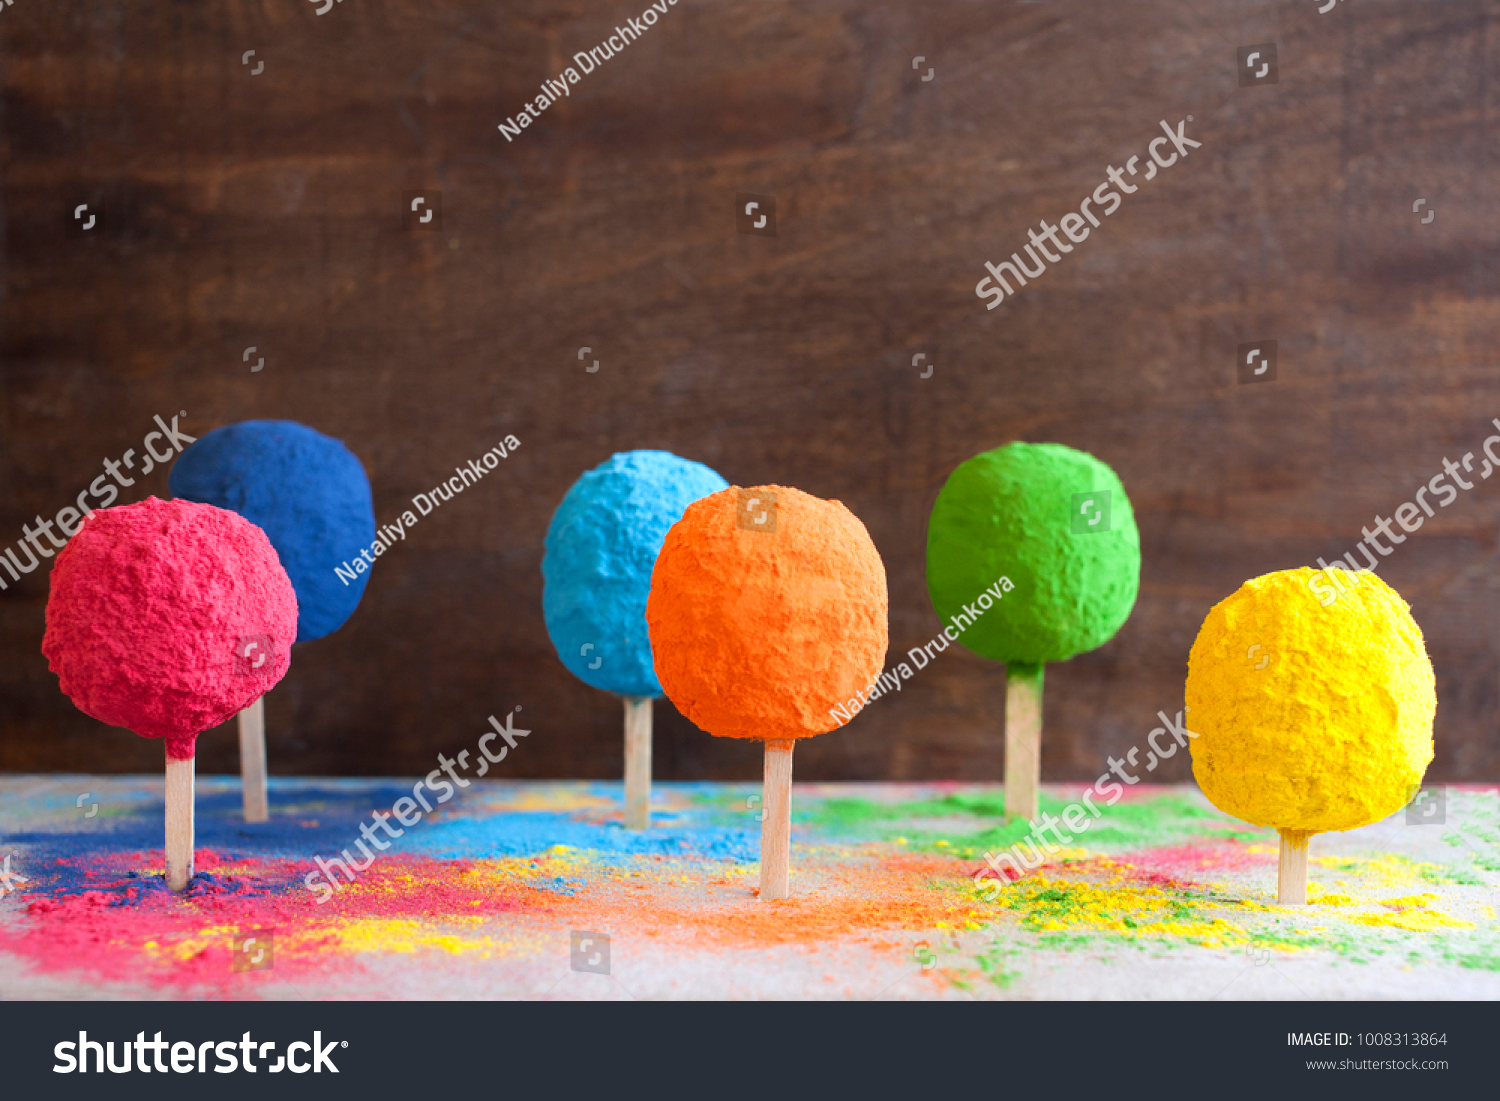 Bright colours in shapes of trees or posicles for Indian holi festival. Colorful gulal (powder colors) for Happy Holi. #1008313864